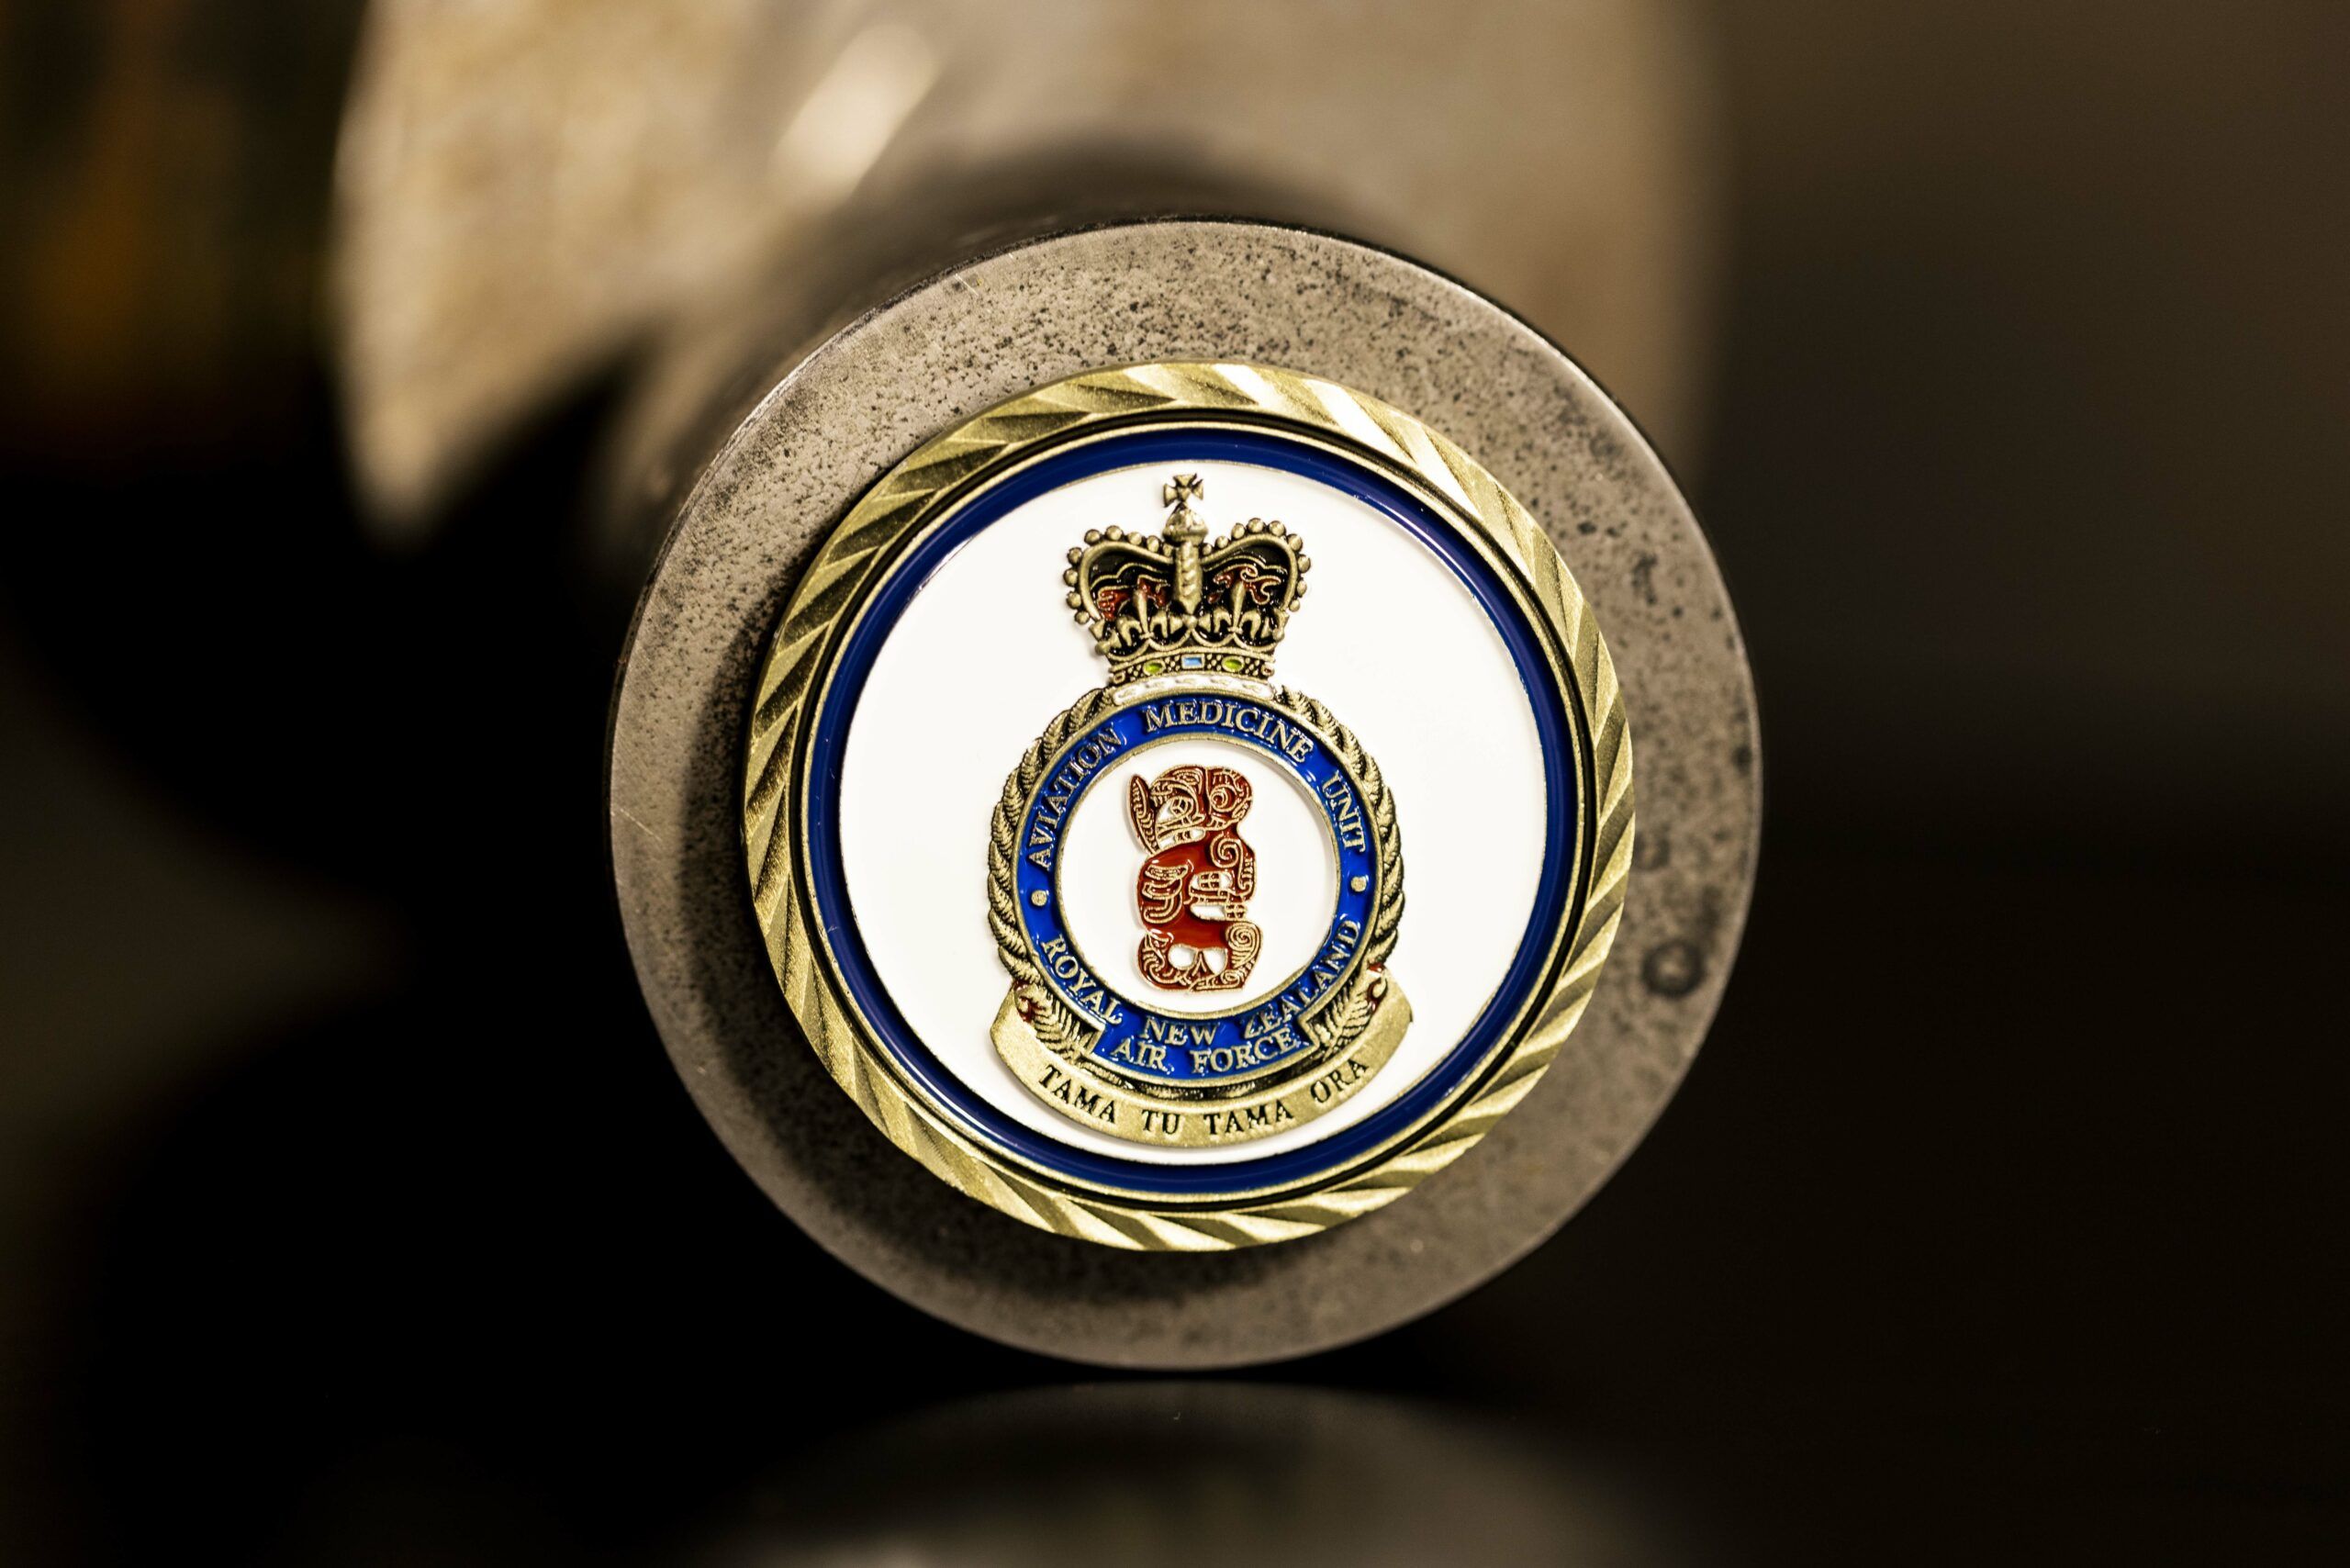 Custom challenge coin, created for the Royal New Zealand Air Force.